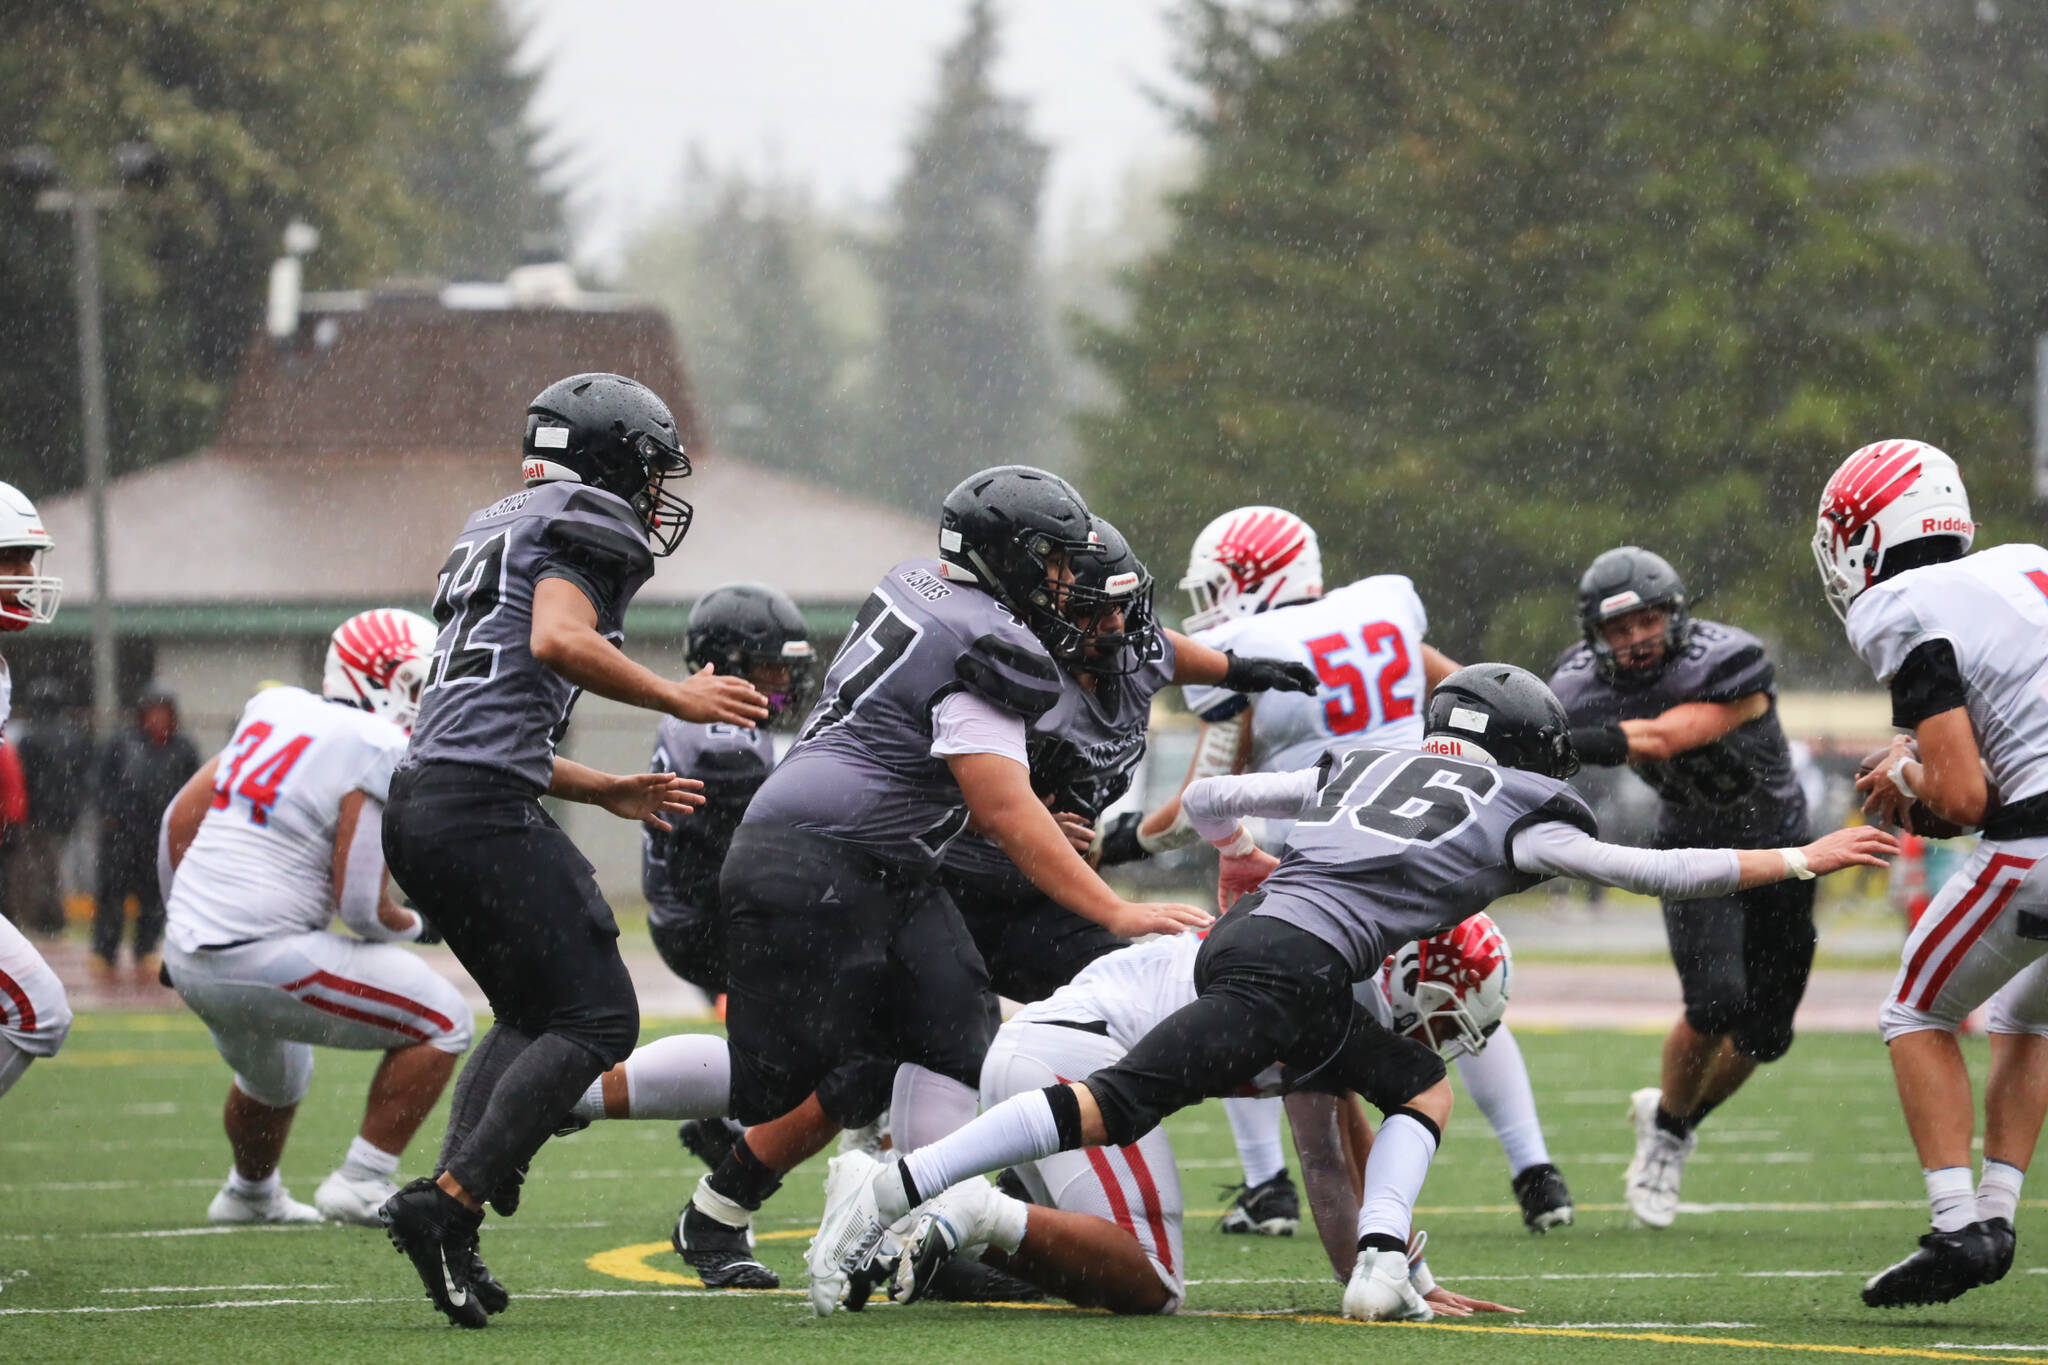 Players collide during the second quarter of the Juneau Huskies’ season opener against East Anchorage Saturday afternoon at Adair-Kennedy Memorial Park. (Clarise Larson / Juneau Empire)